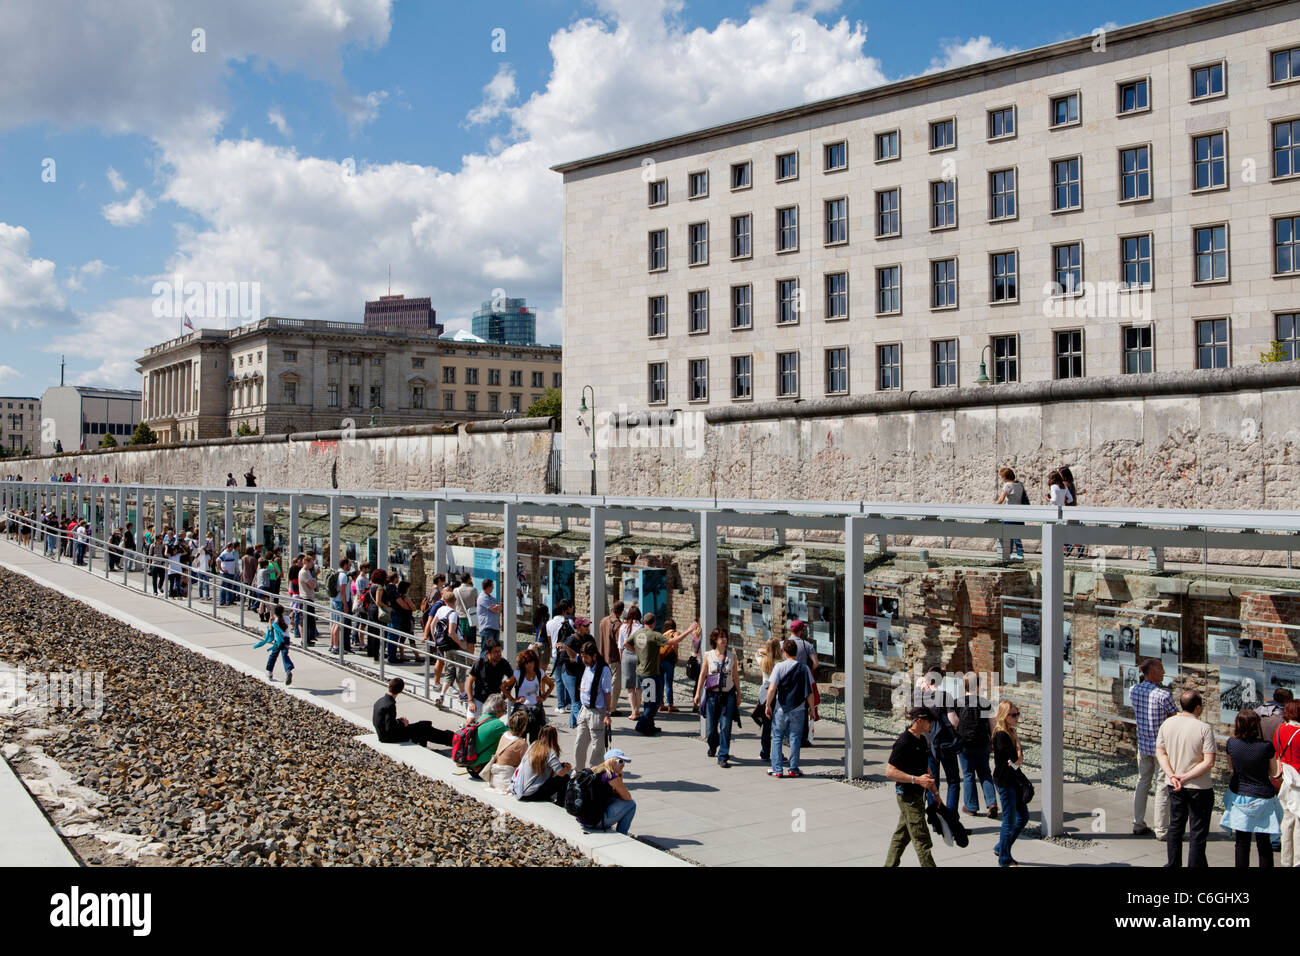 Berlin Wall. Tourists visiting the remains of the Wall that divided the town of Berlin. Germany Stock Photo